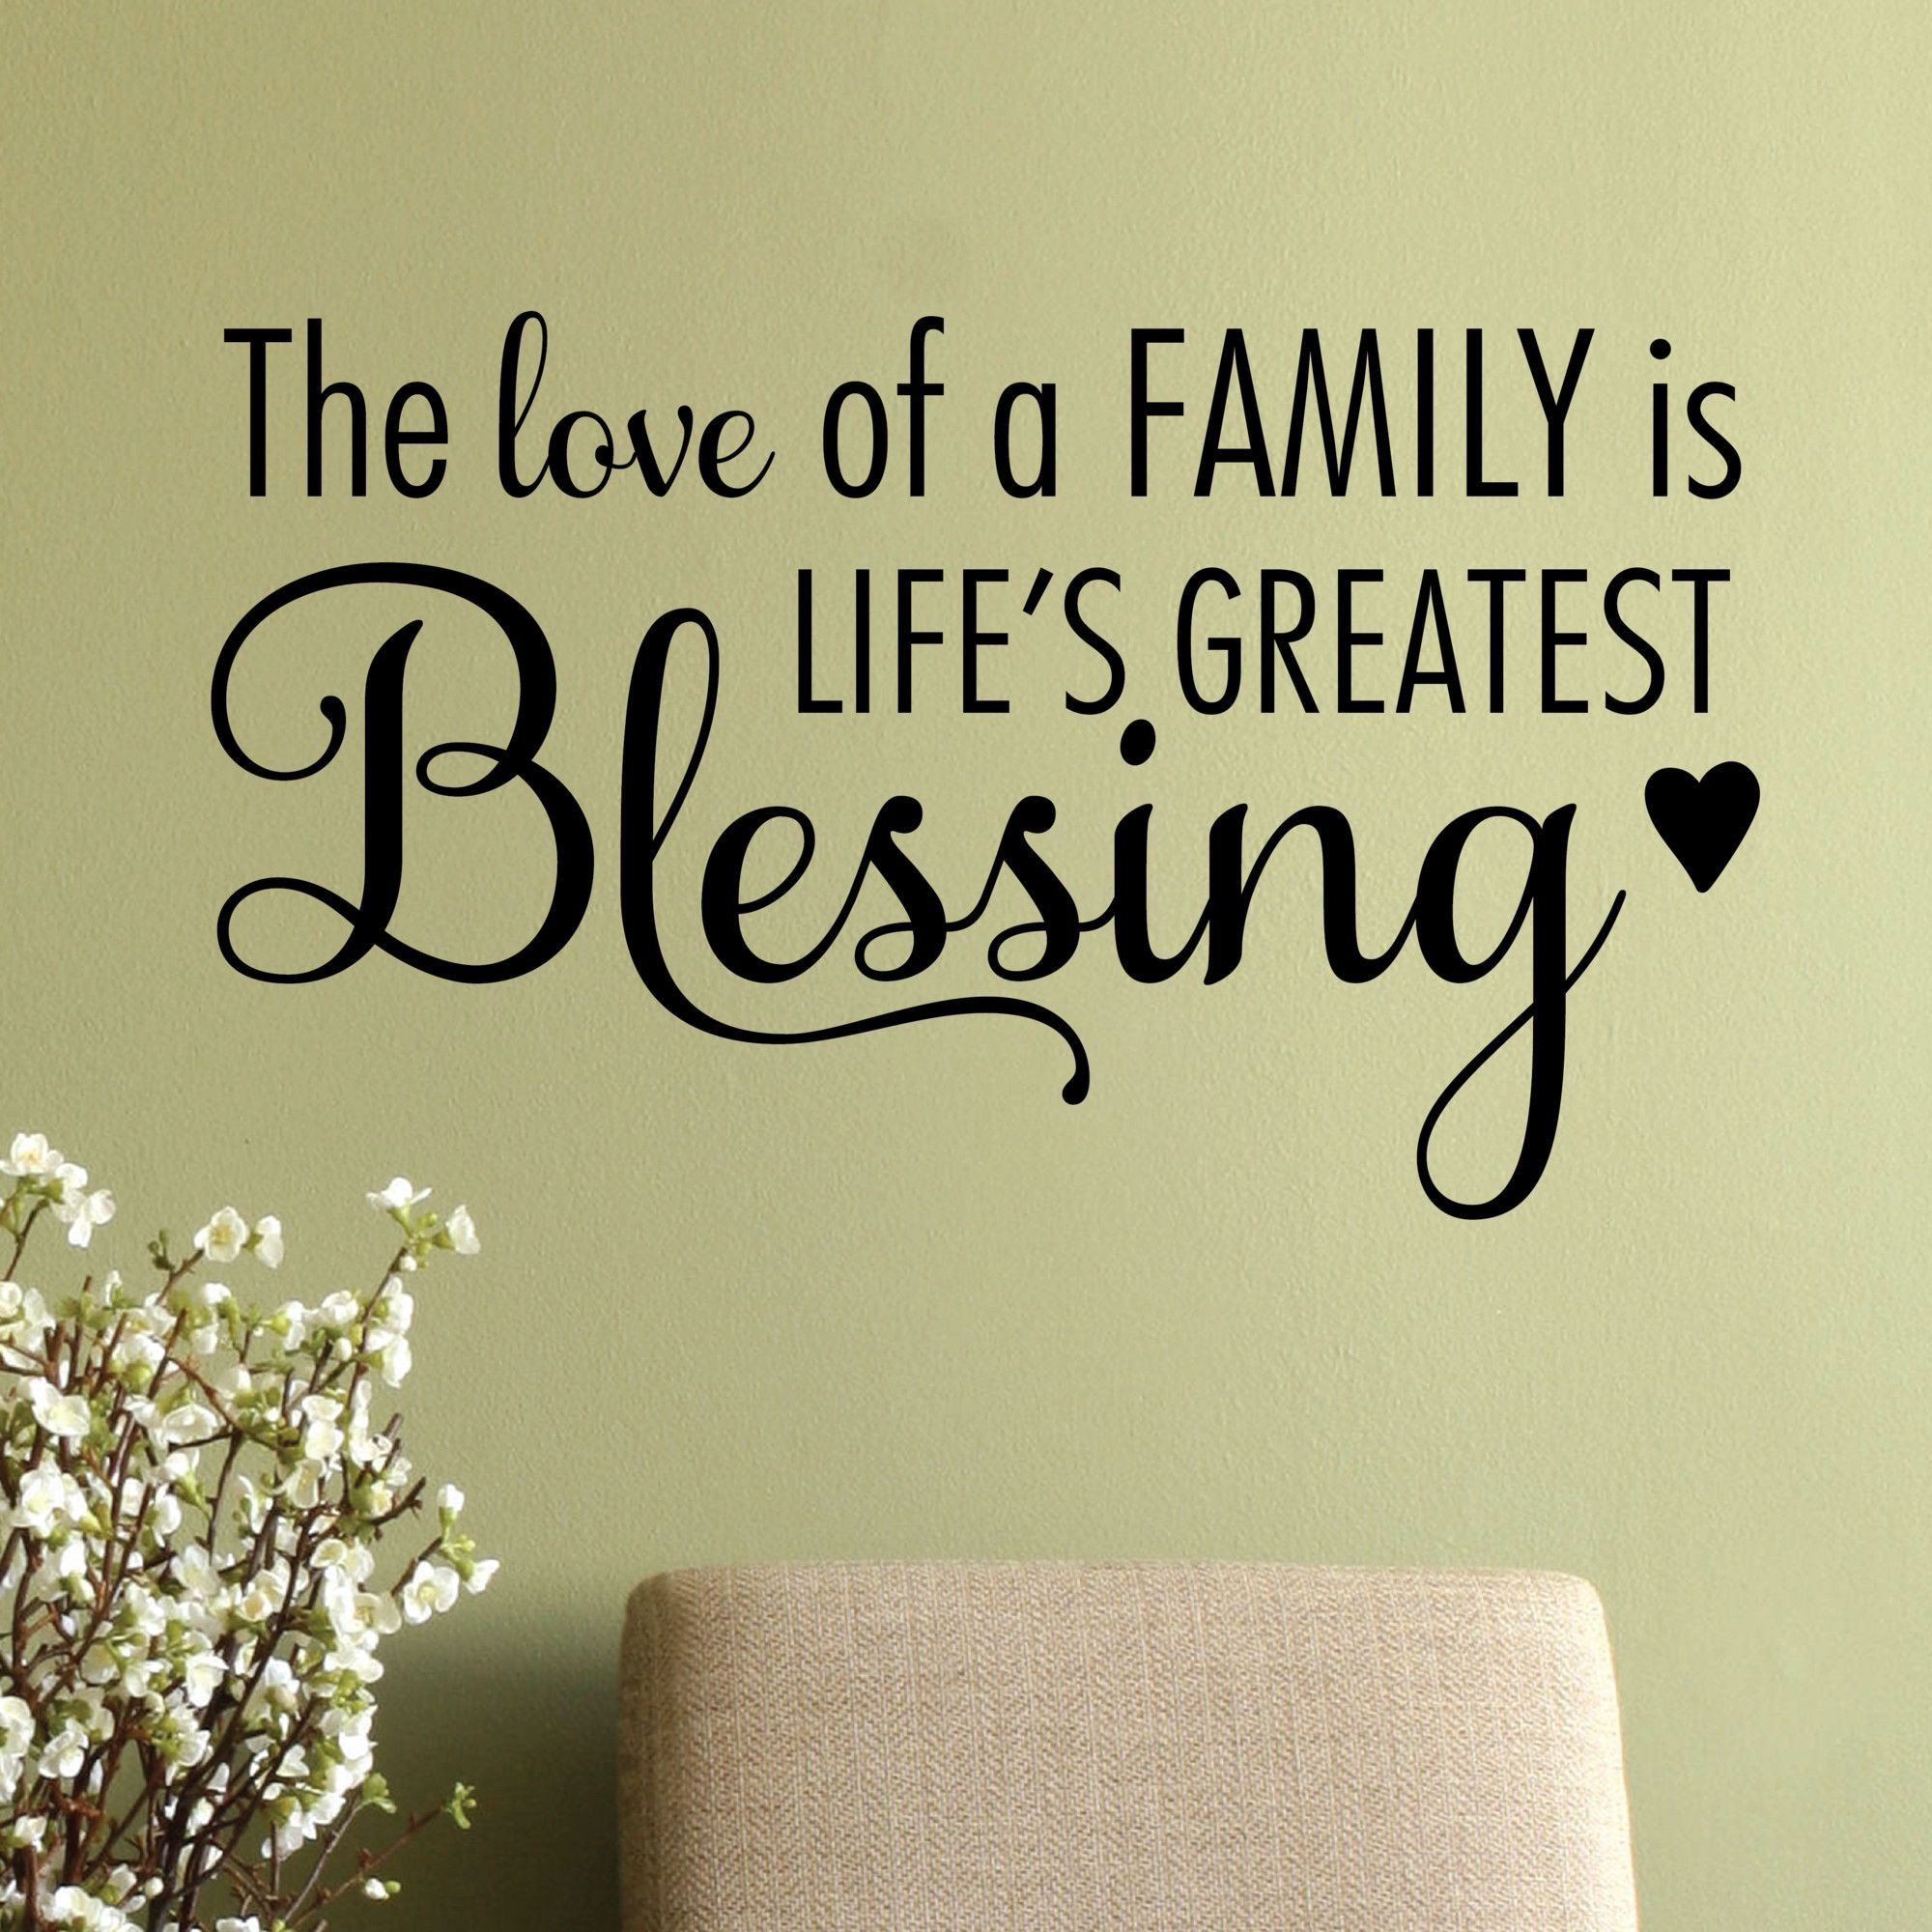 Inspirational Quotes Family Love
 Features Title The love of a family is lifes greatest